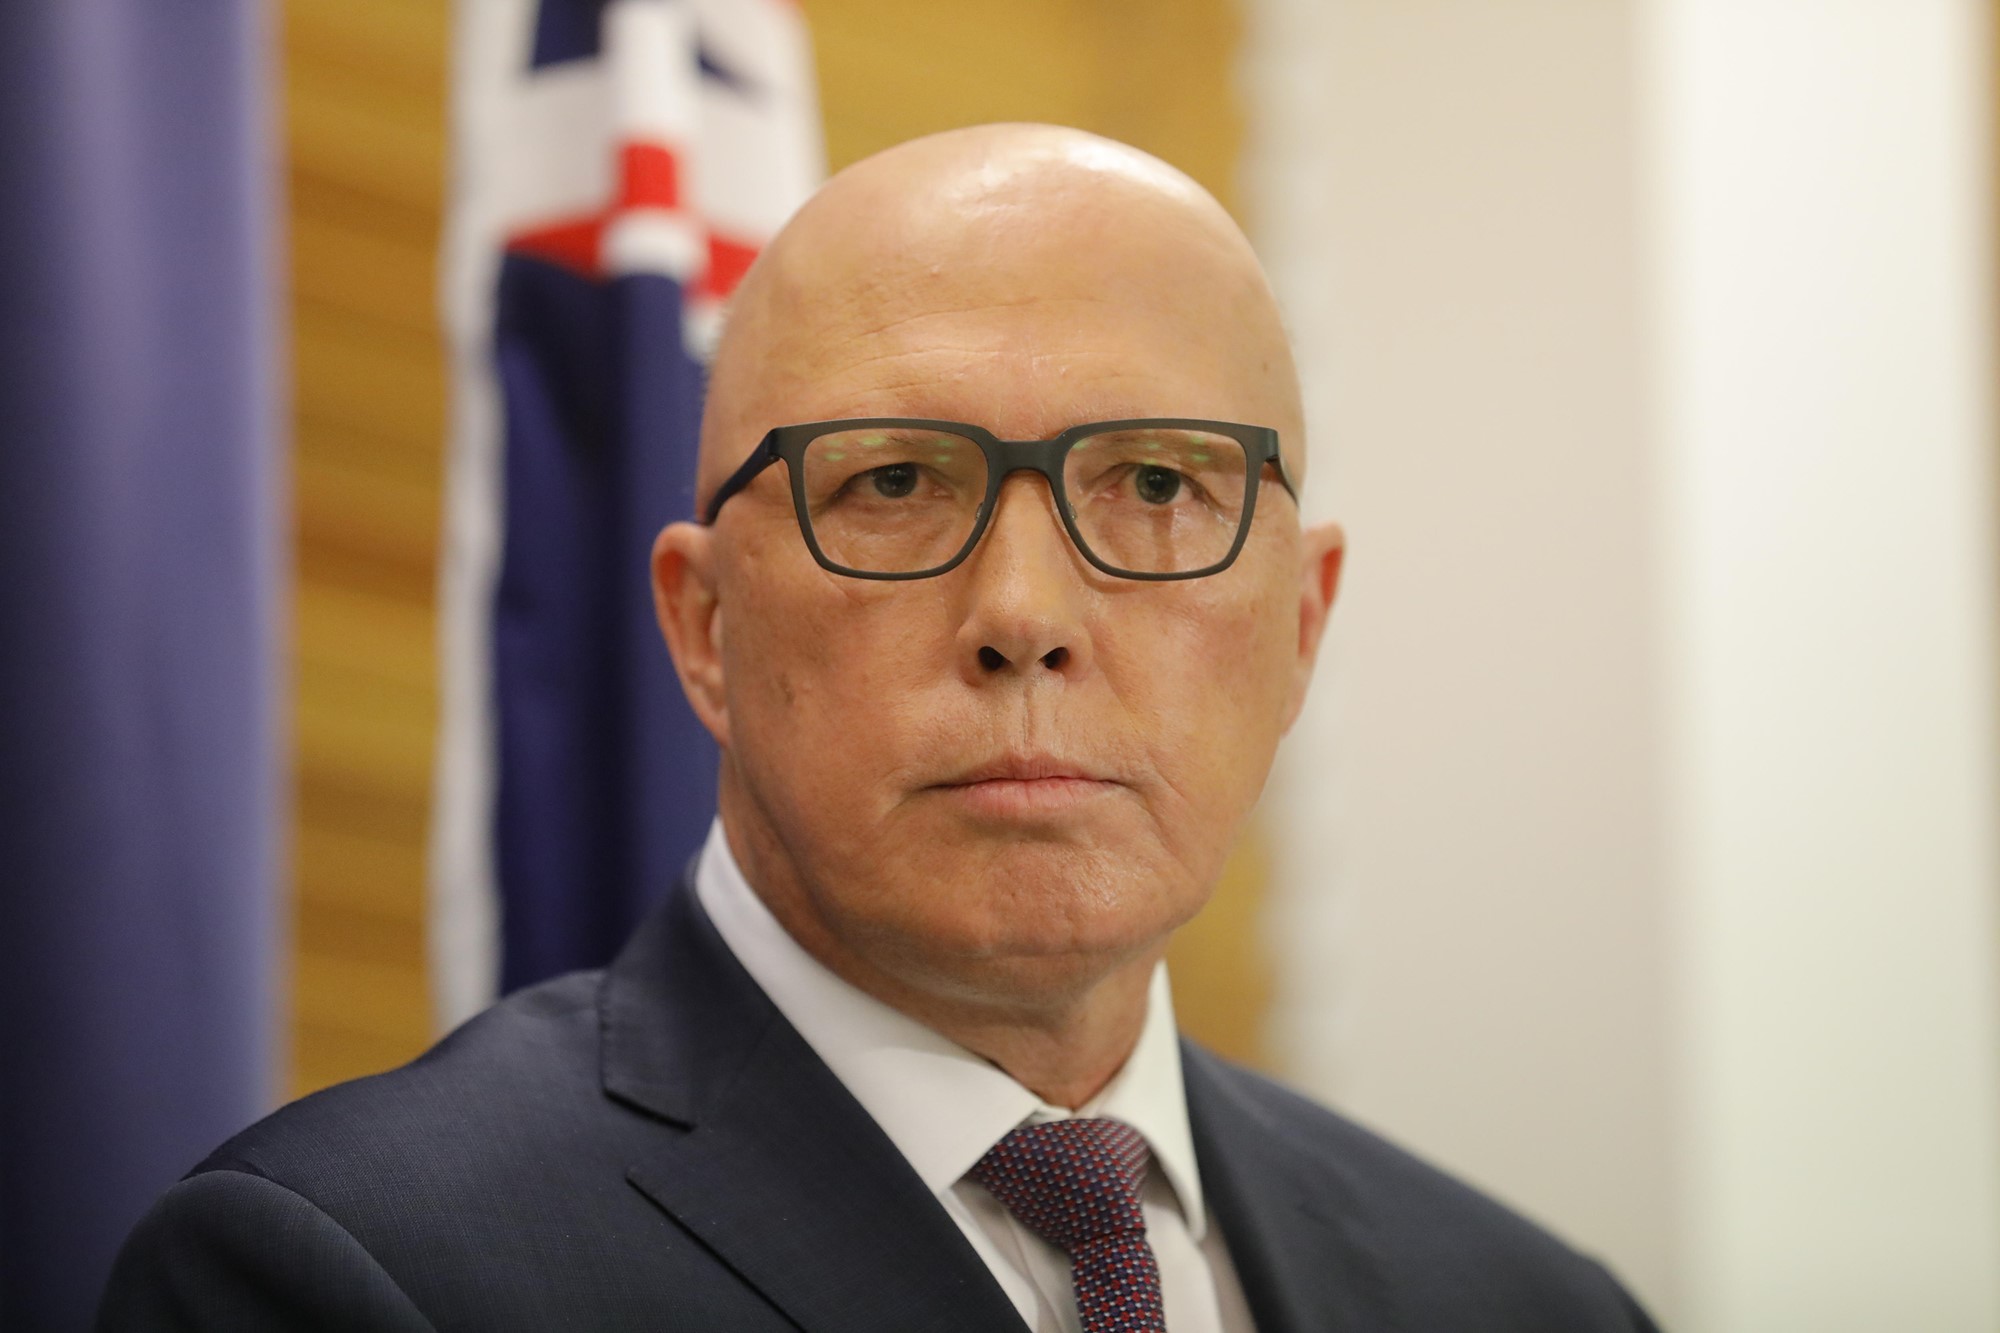 A bald man wearing glassed and a suit and tie stands in front of an Australian flag